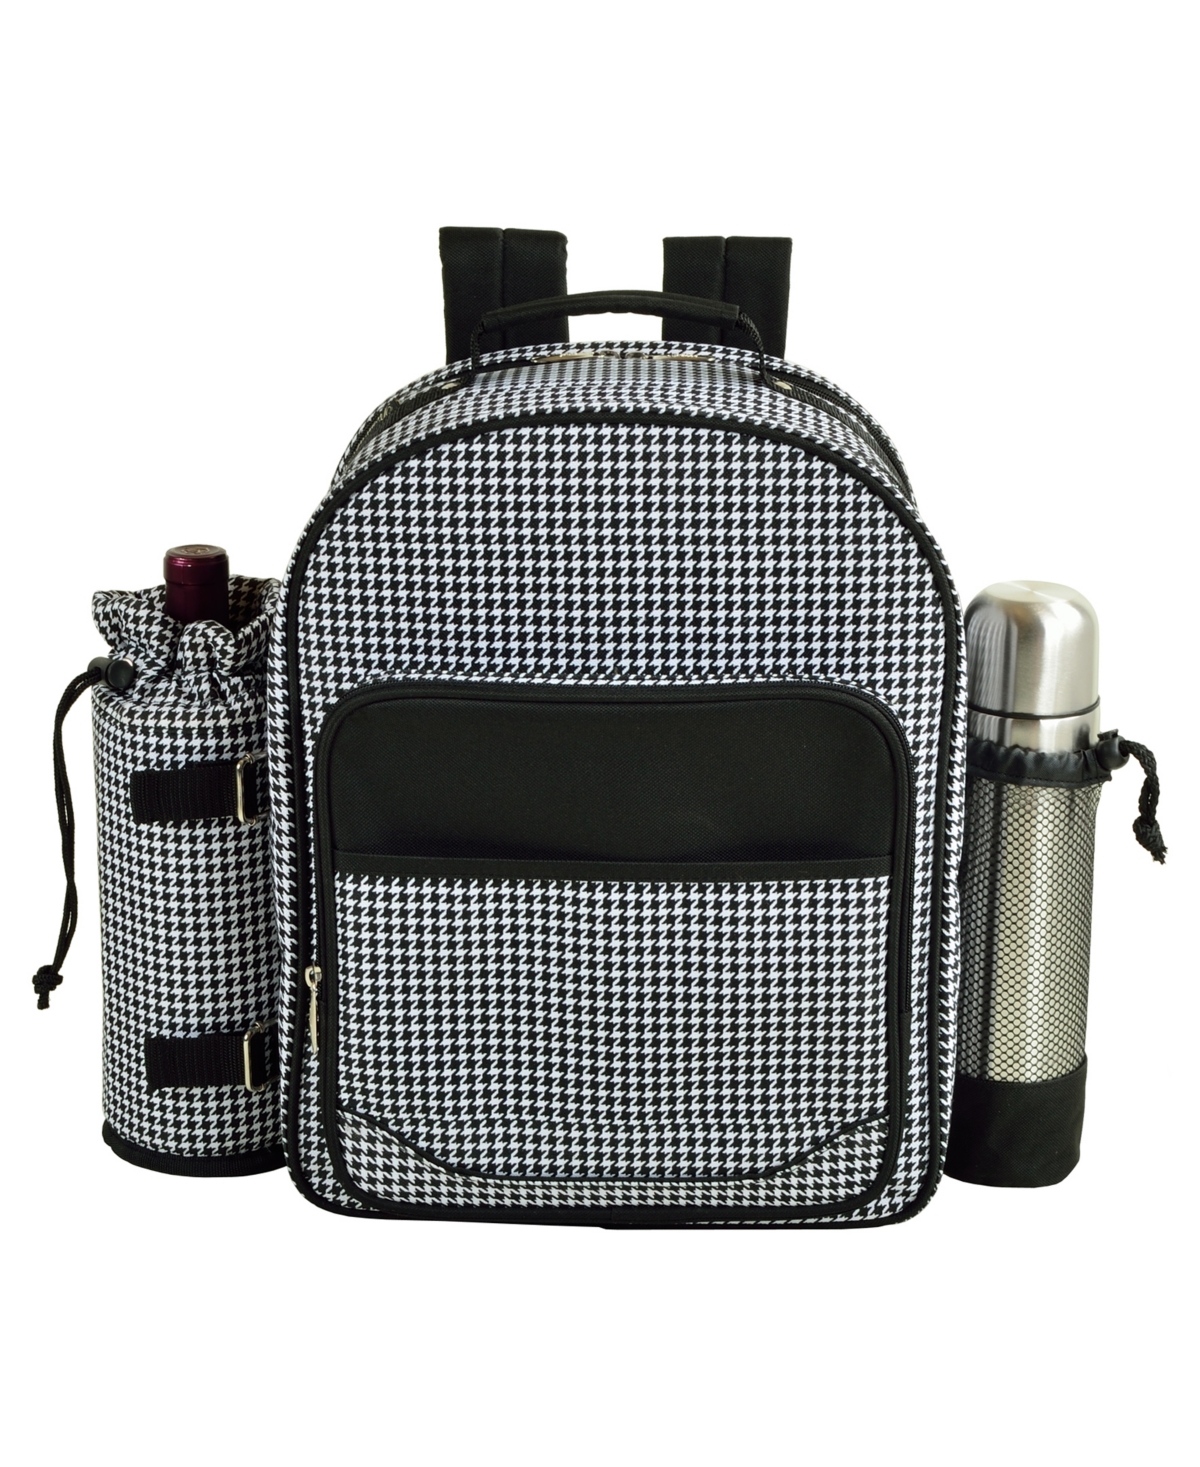 Deluxe 2 Person Picnic, Coffee Backpack Cooler with Wine Pouch - Yellow